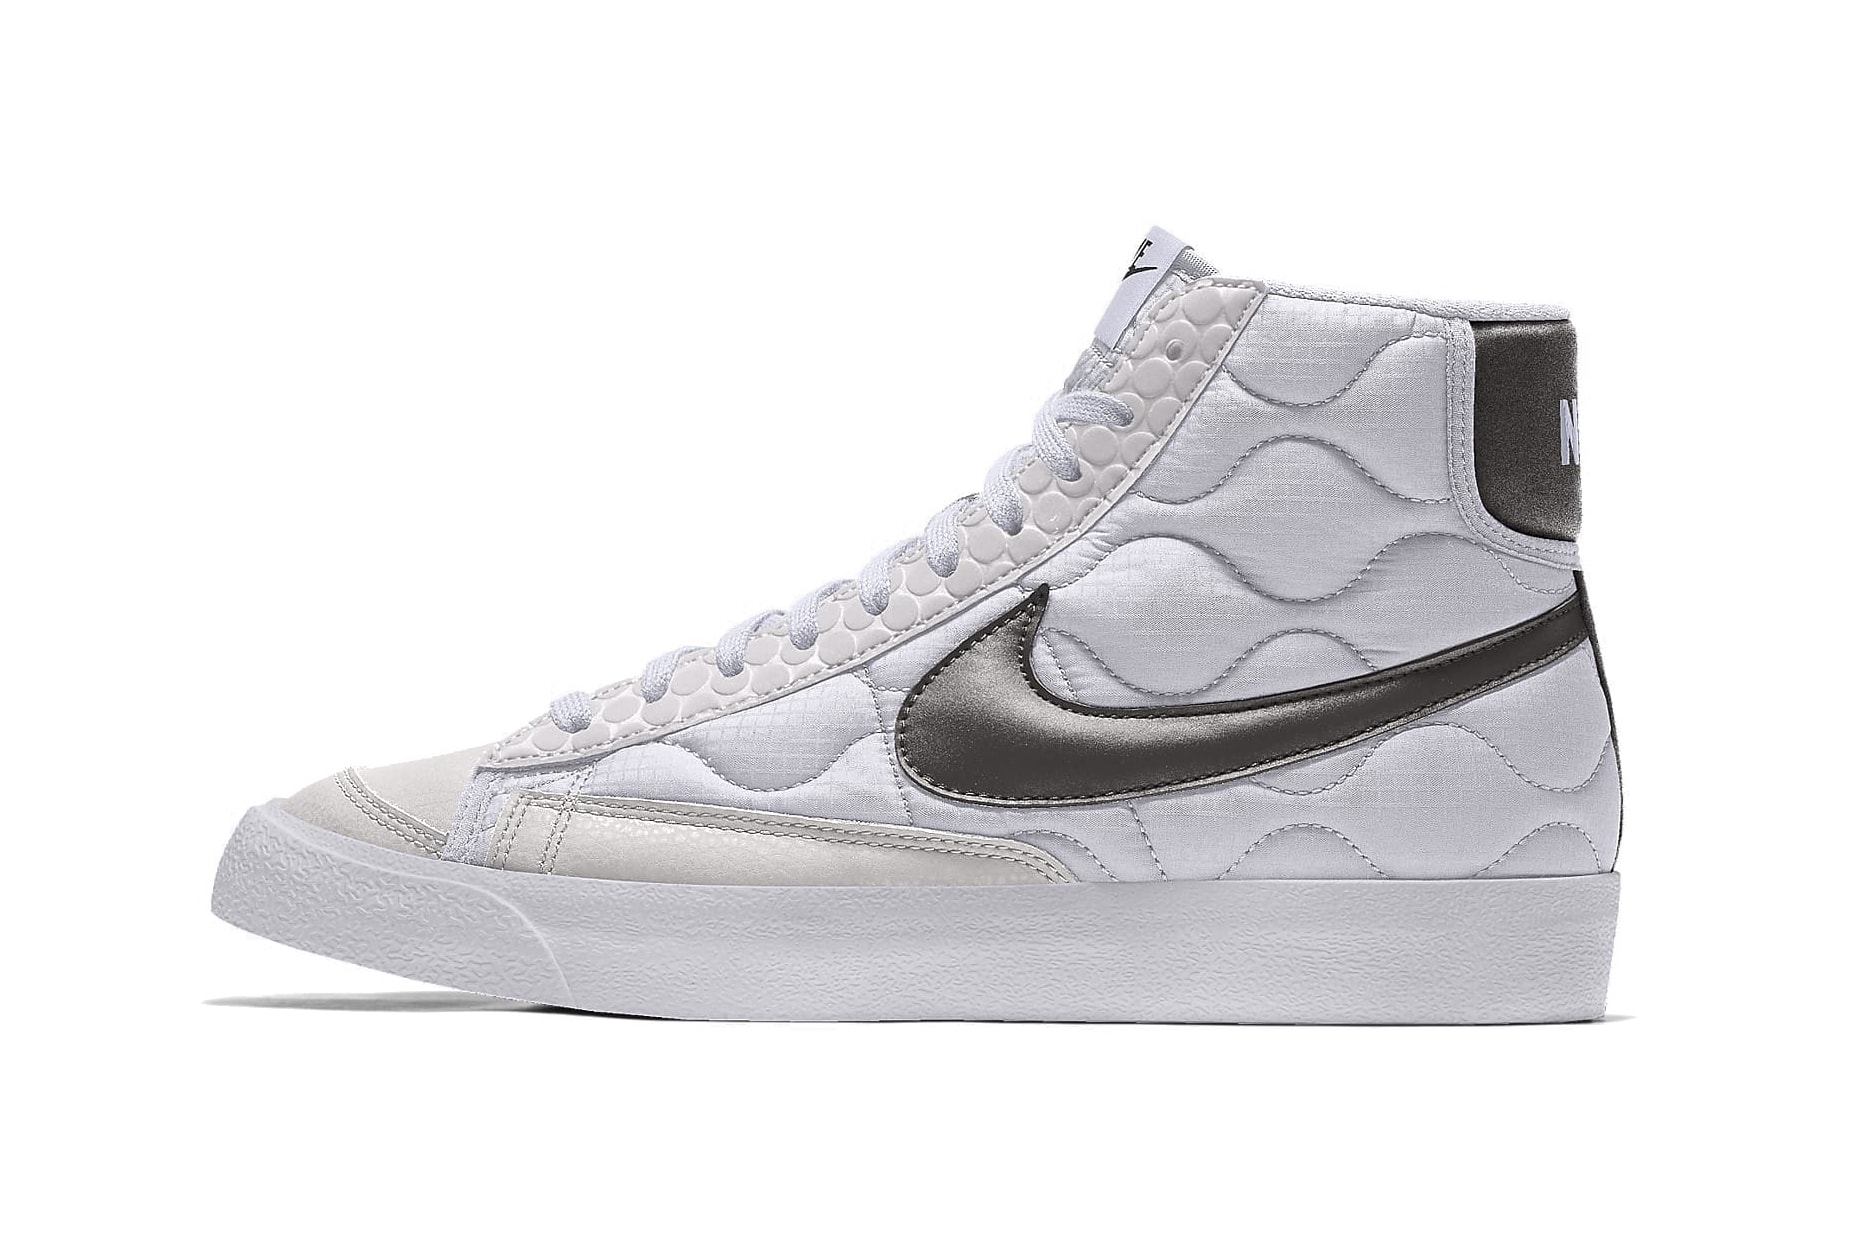 Nike Blazer Mid Retro 3M Quilted Upper Sneaker Padded Texture Fall Winter Shoe Silhouette Nike Blazer Mid Vintage '77 3M